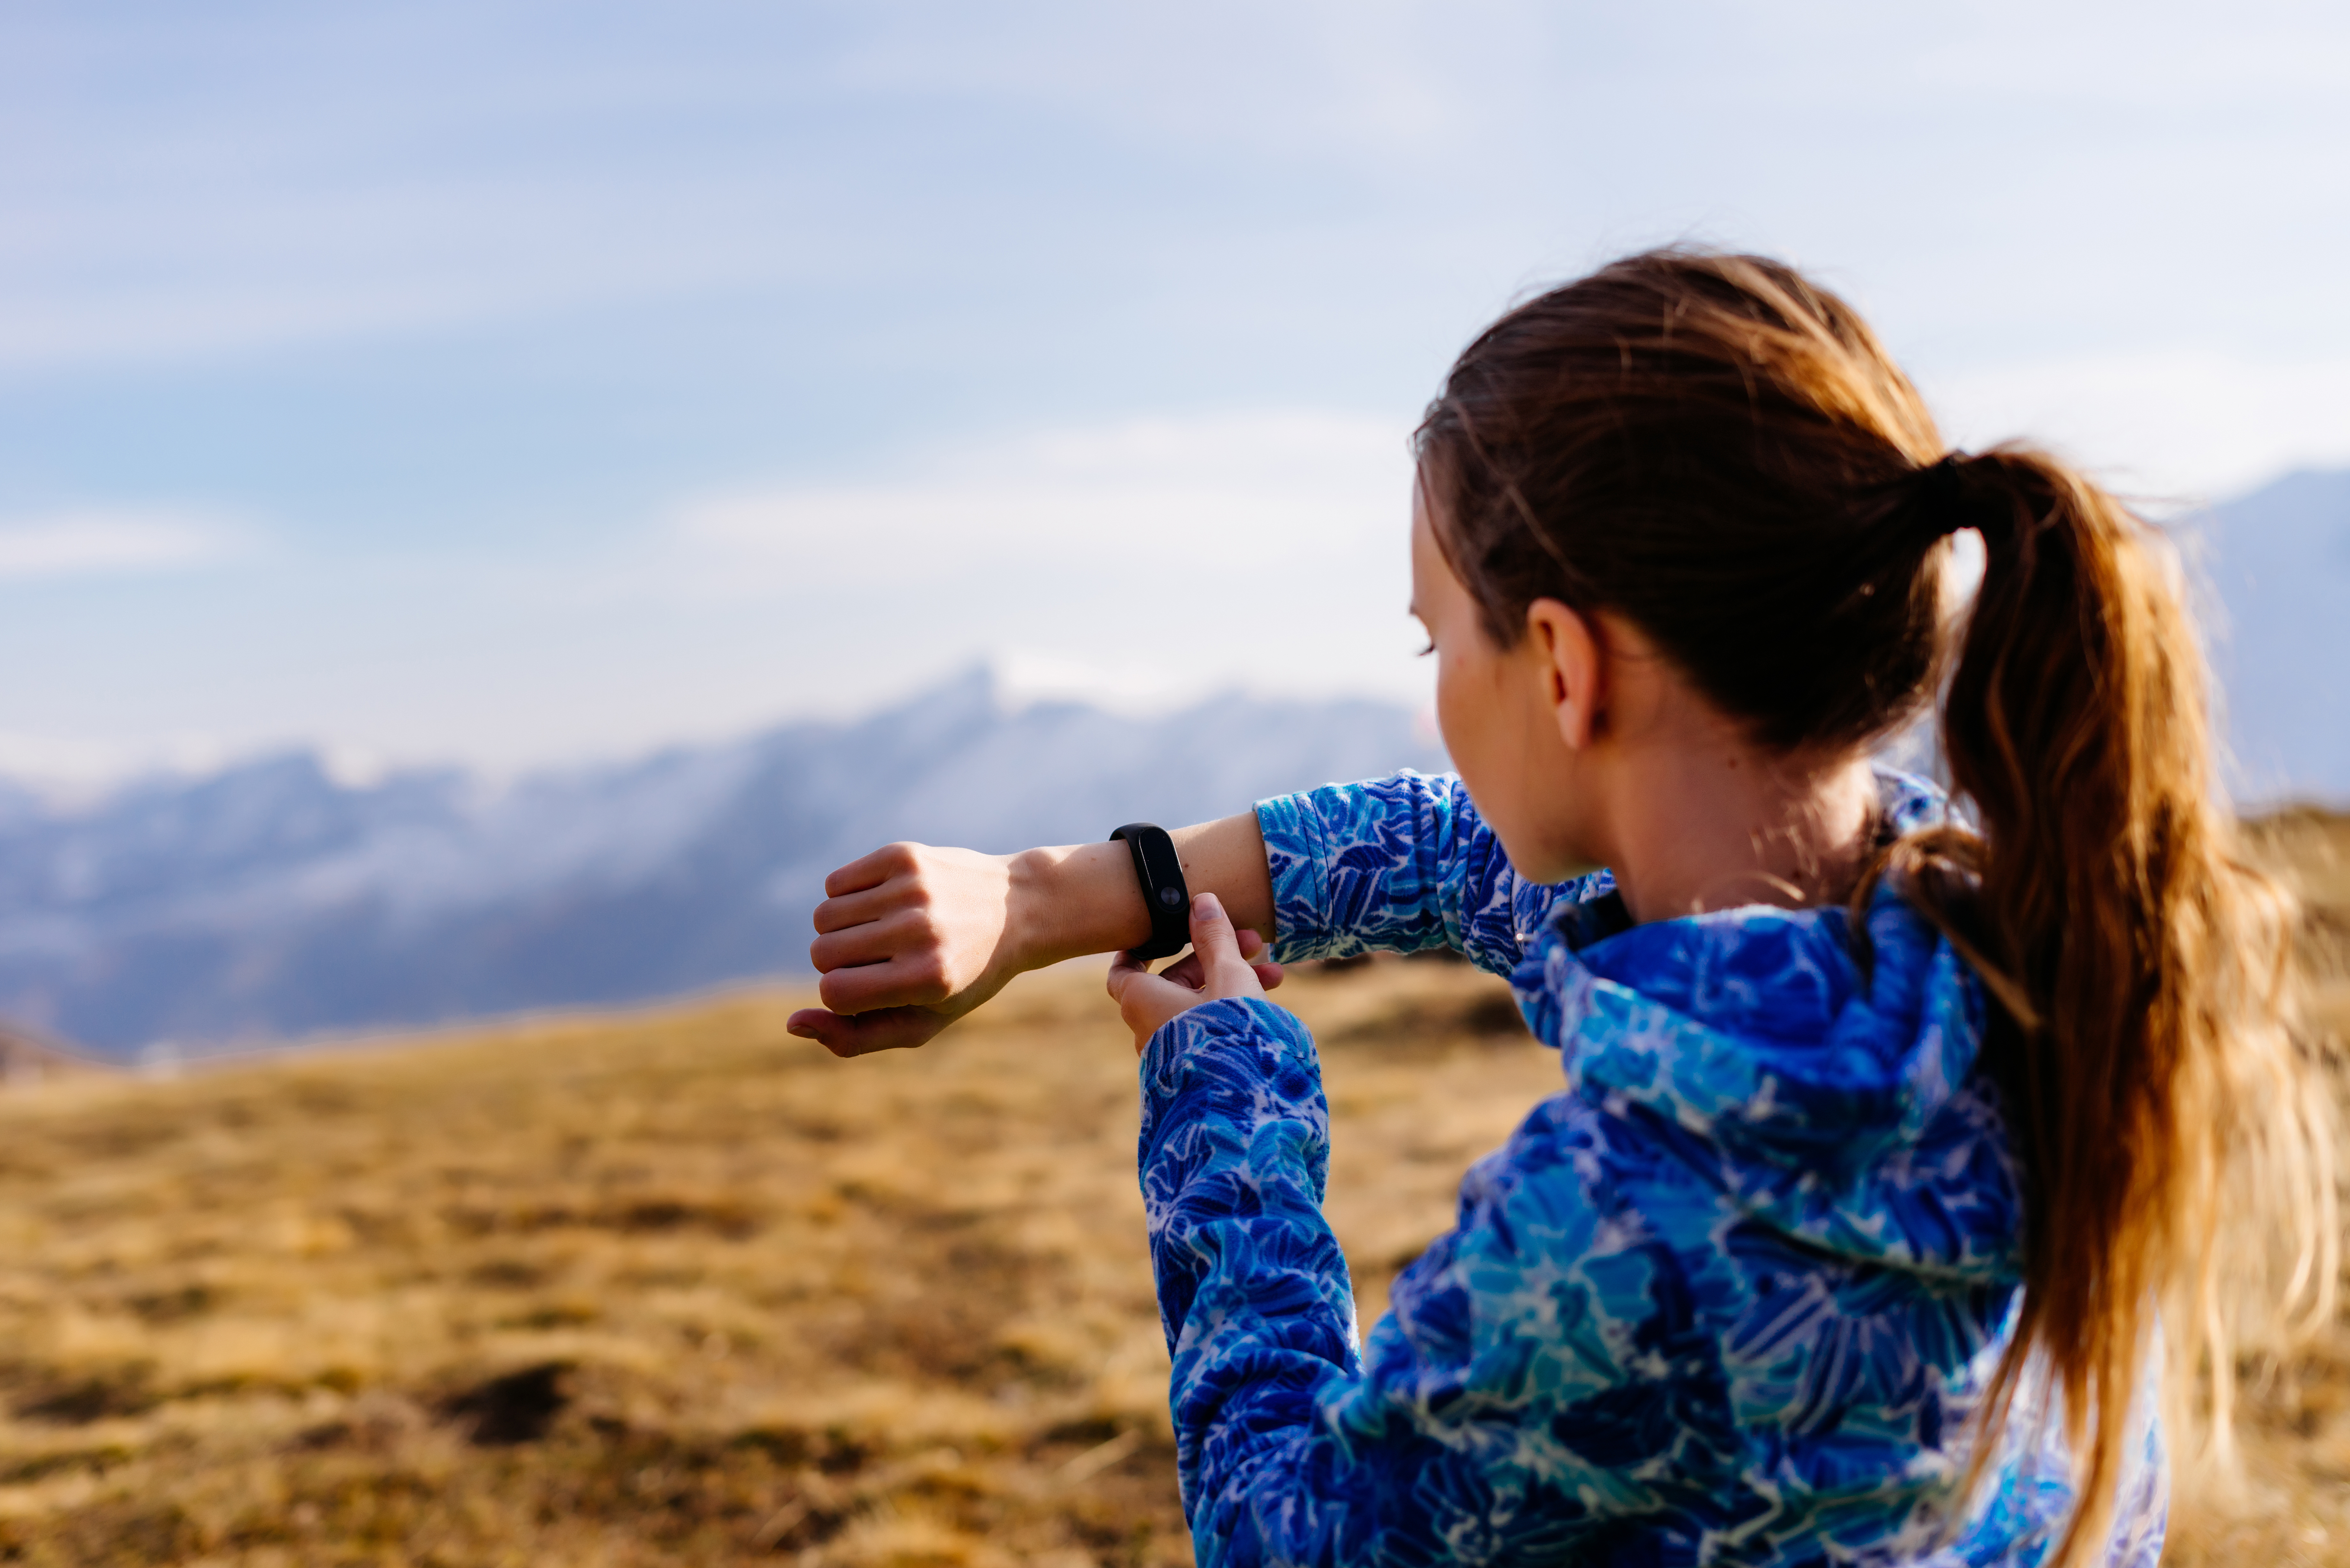 Fitness tracker evaluation: Ratings for health and activity monitors